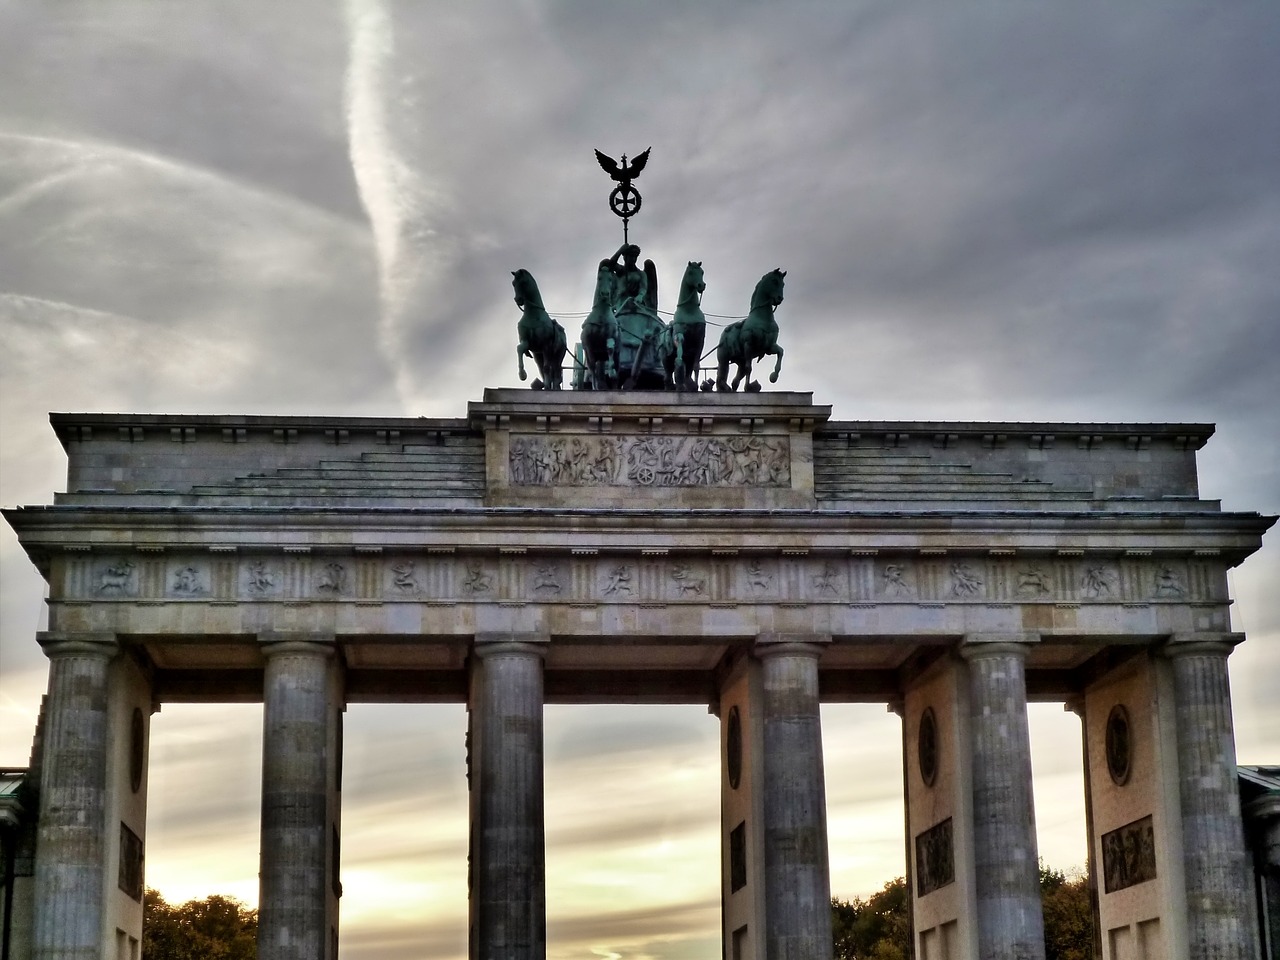 a group of people that are standing in front of a building, a statue, pexels contest winner, berlin secession, an archway, untethered stelae, bridge, high quality image